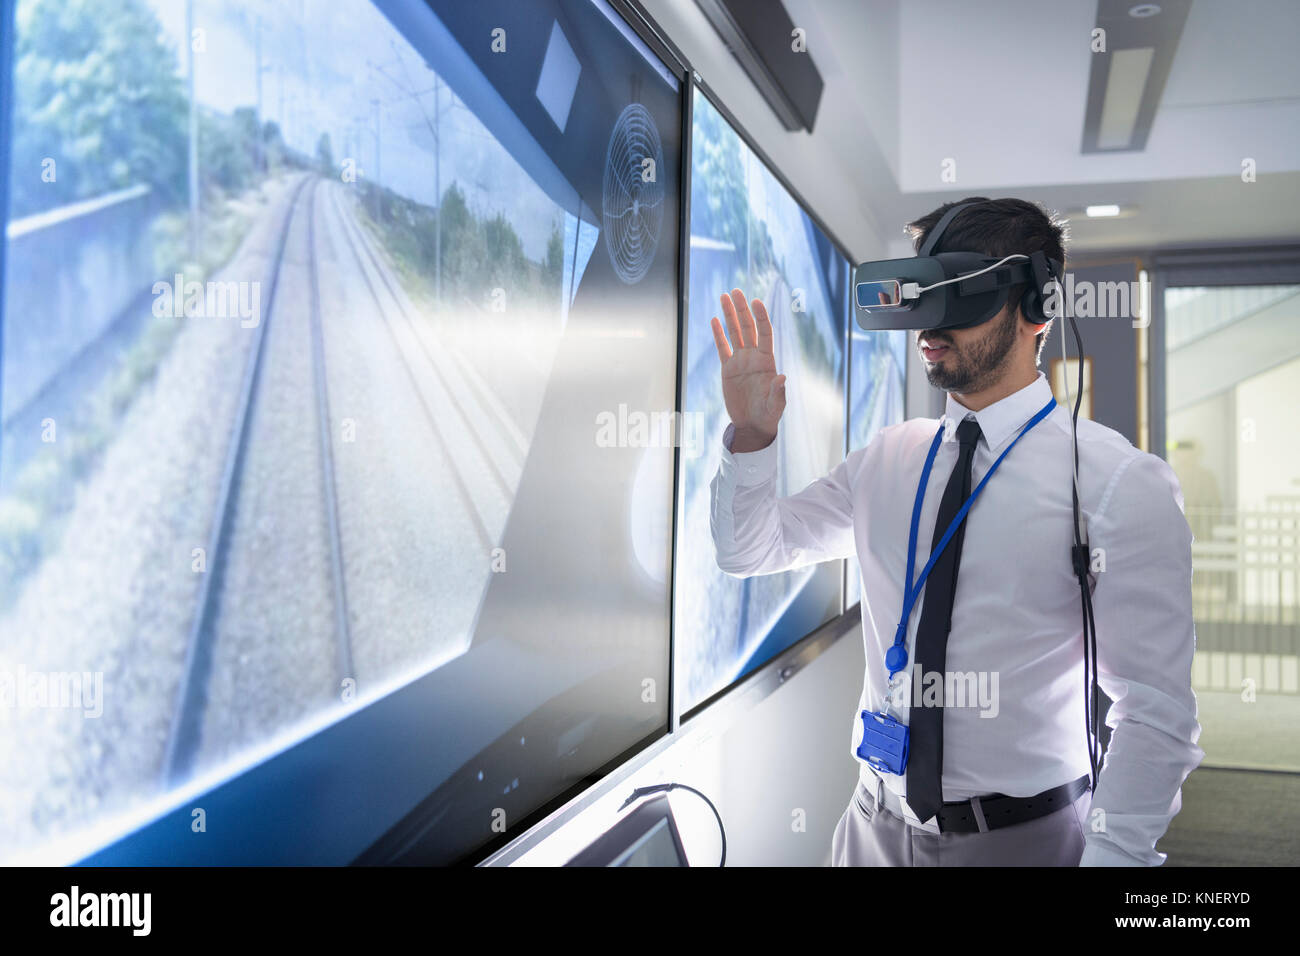 Engineering apprentice using Virtual Reality system in railway engineering facility Stock Photo